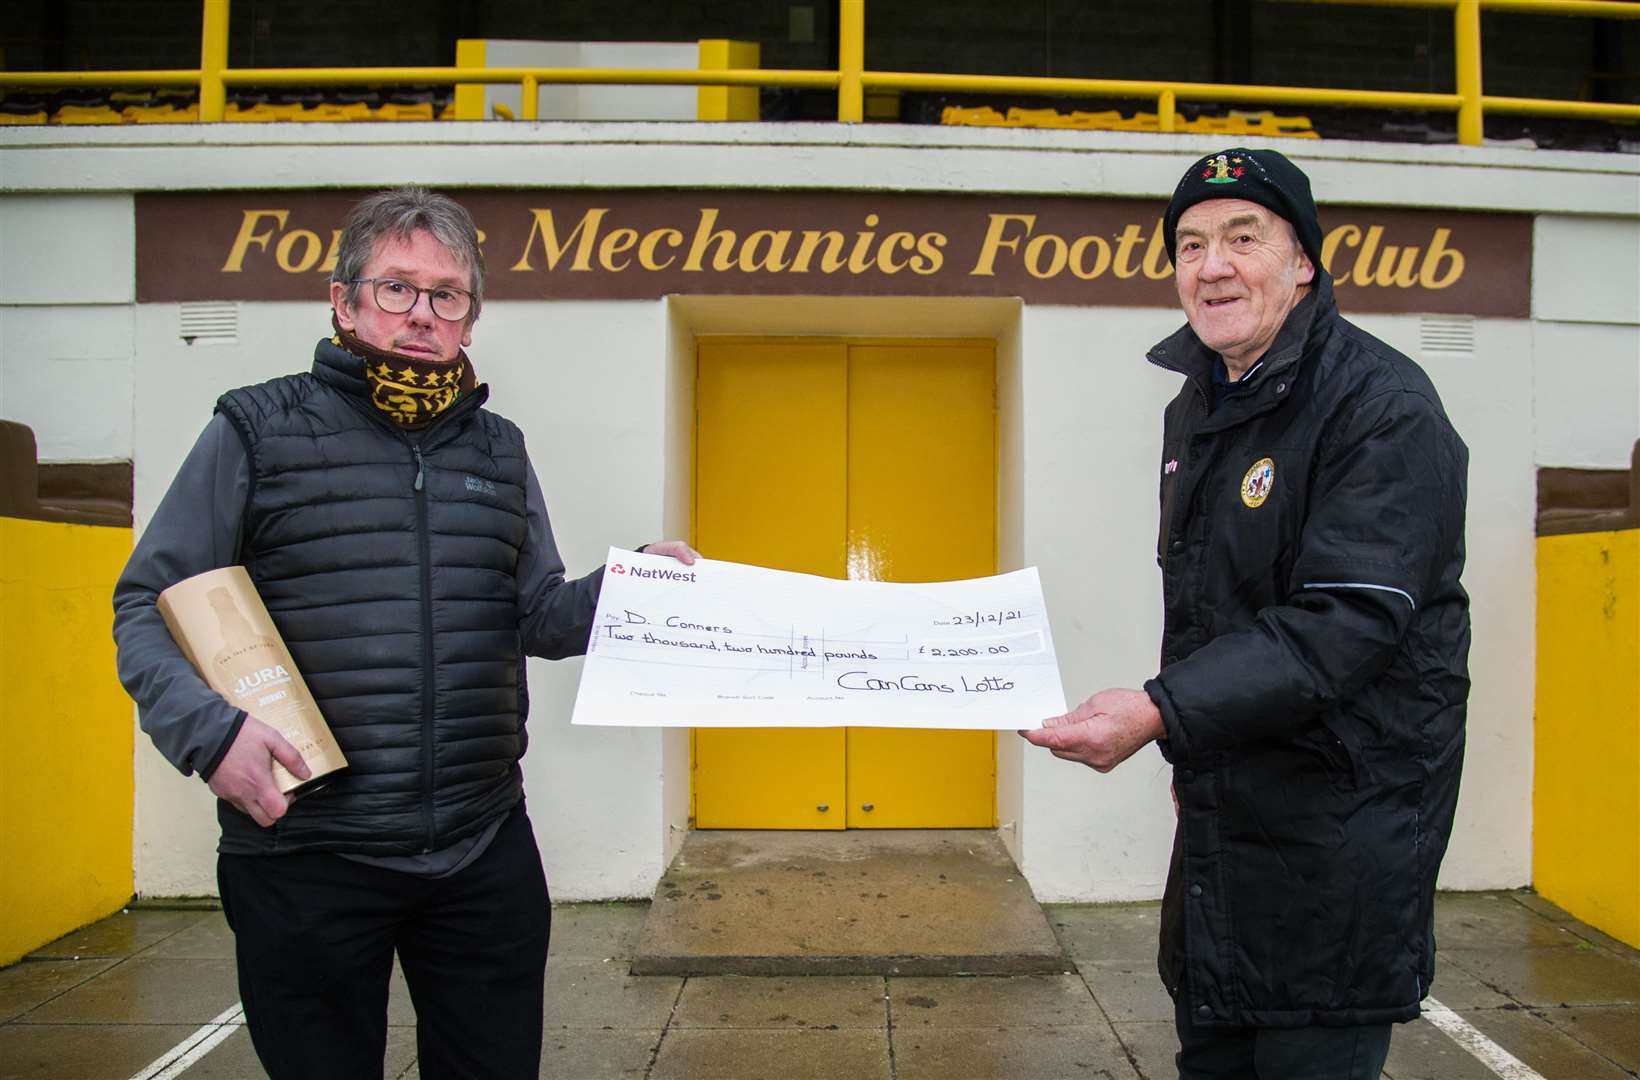 Dougie (right) is presented with a cheque by Cans vice-chairman George Alexander. Picture: Becky Saunderson